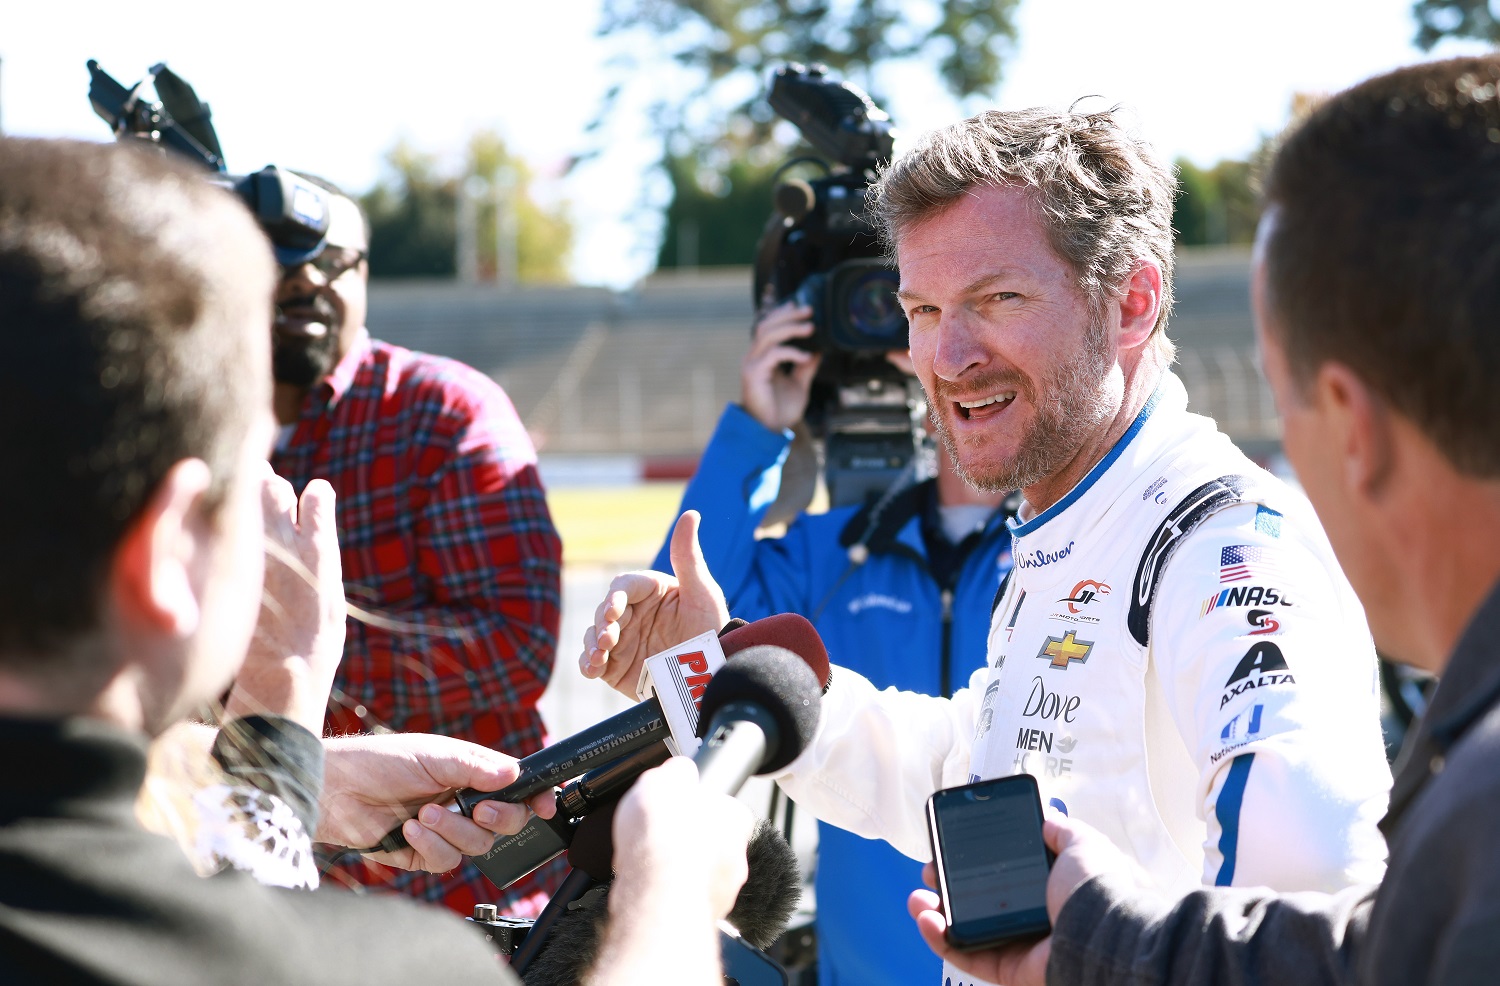 Dale Earnhardt Jr. speaks to the media after a testing session with the NASCAR Next Gen car at Bowman Gray Stadium on Oct. 26, 2021 in Winston Salem, North Carolina.